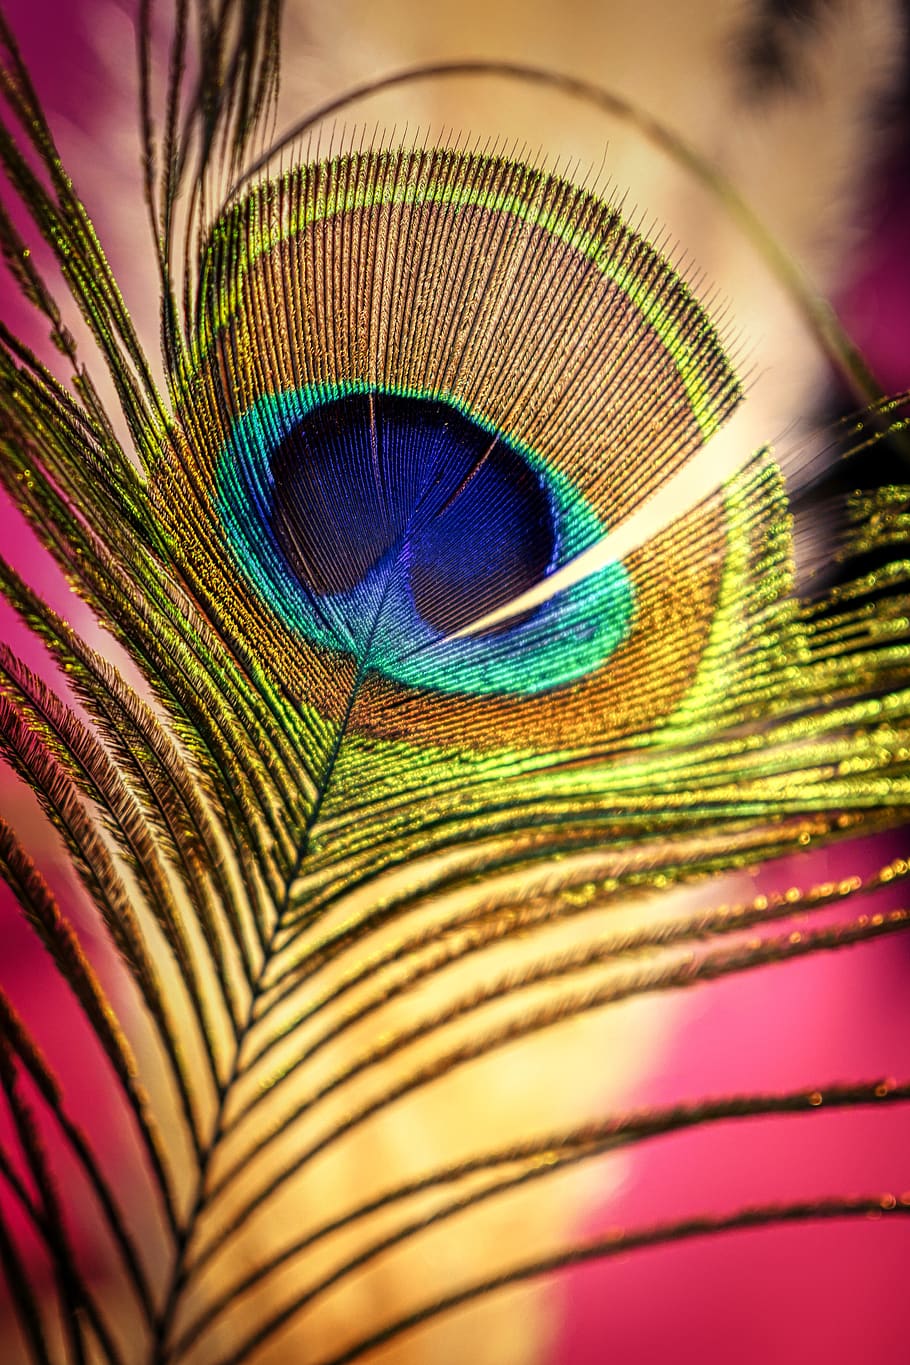 Vinyl Painting Beautiful Peacock wallpaper scenery poster 24x36 inch 3D  Poster - Decorative posters in India - Buy art, film, design, movie, music,  nature and educational paintings/wallpapers at Flipkart.com